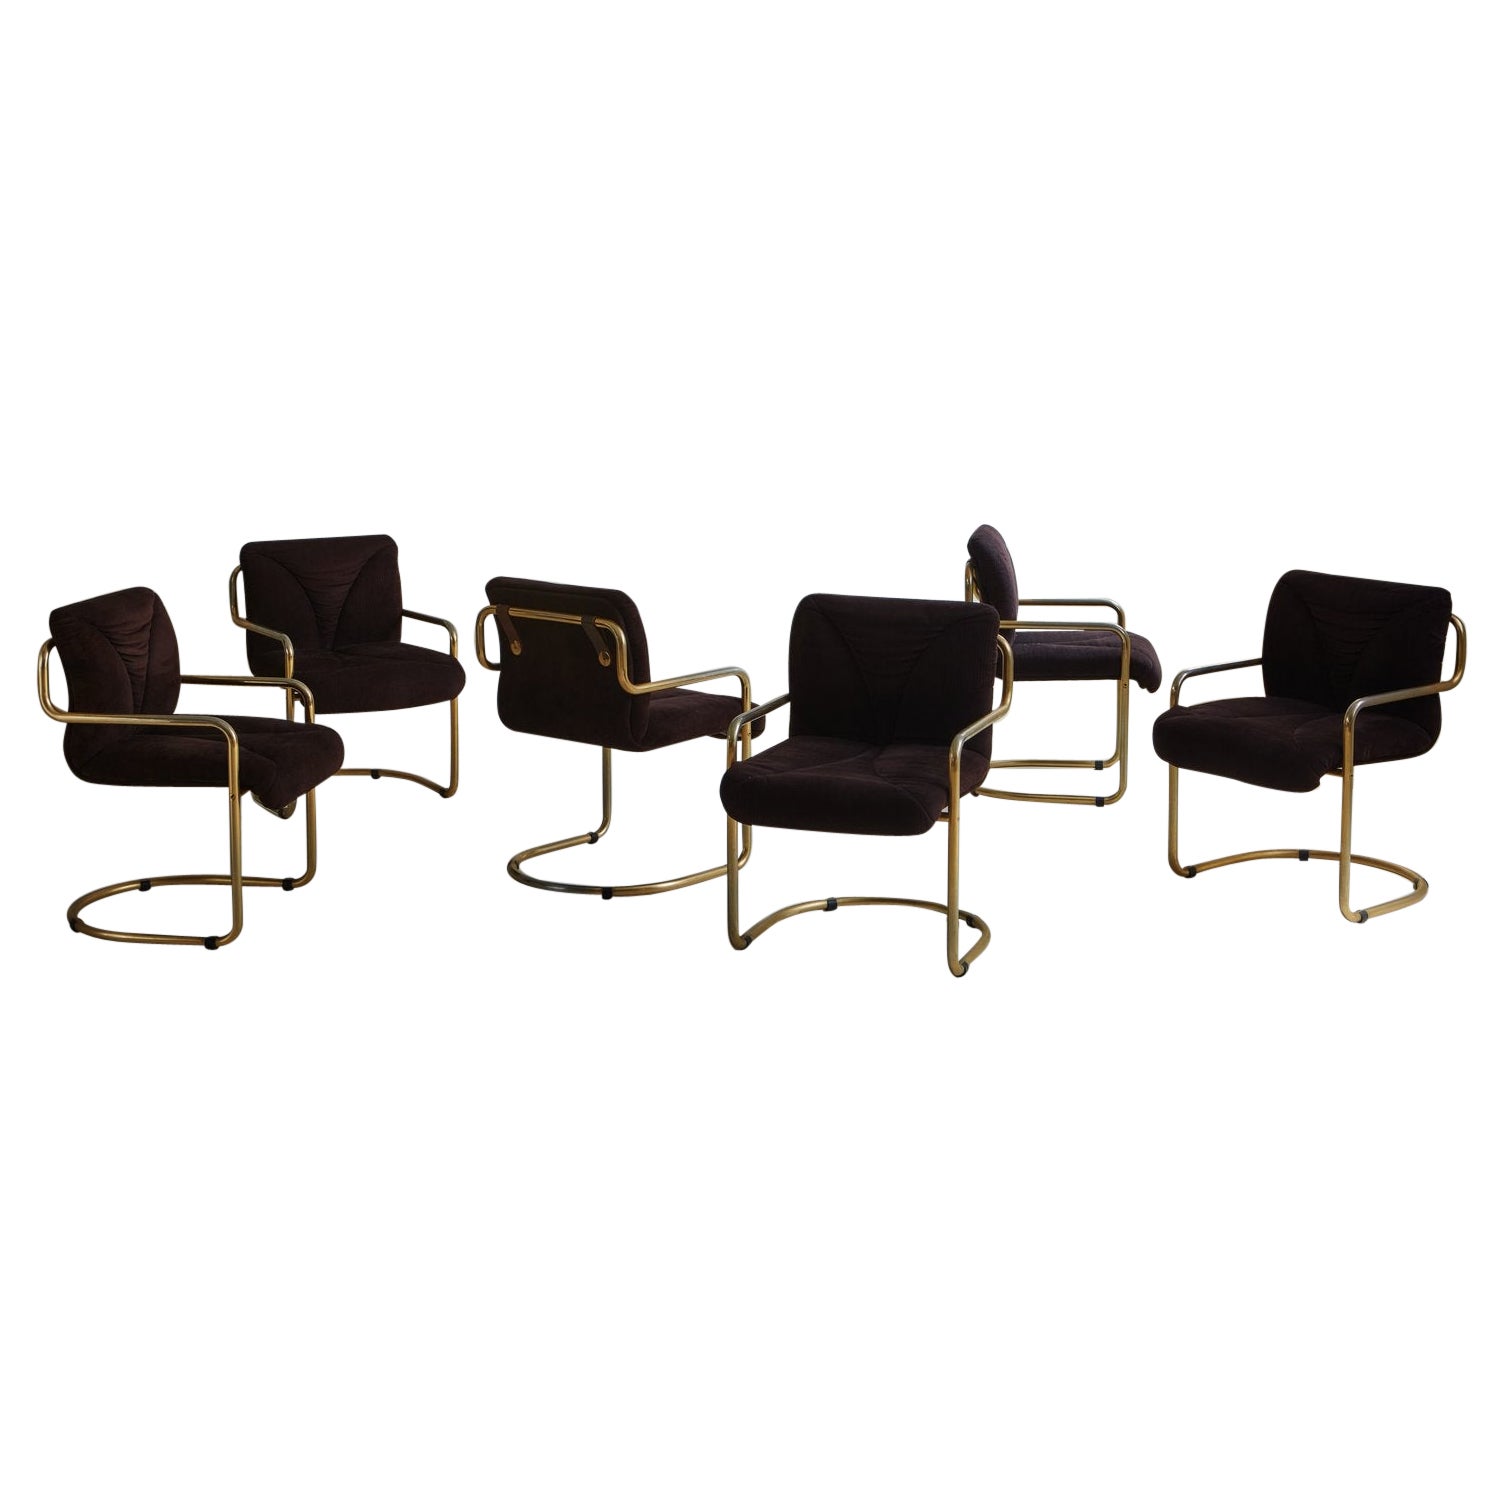 Set of 6 Brass + Brown Cantilevered Dining Chairs with Leather Straps, France